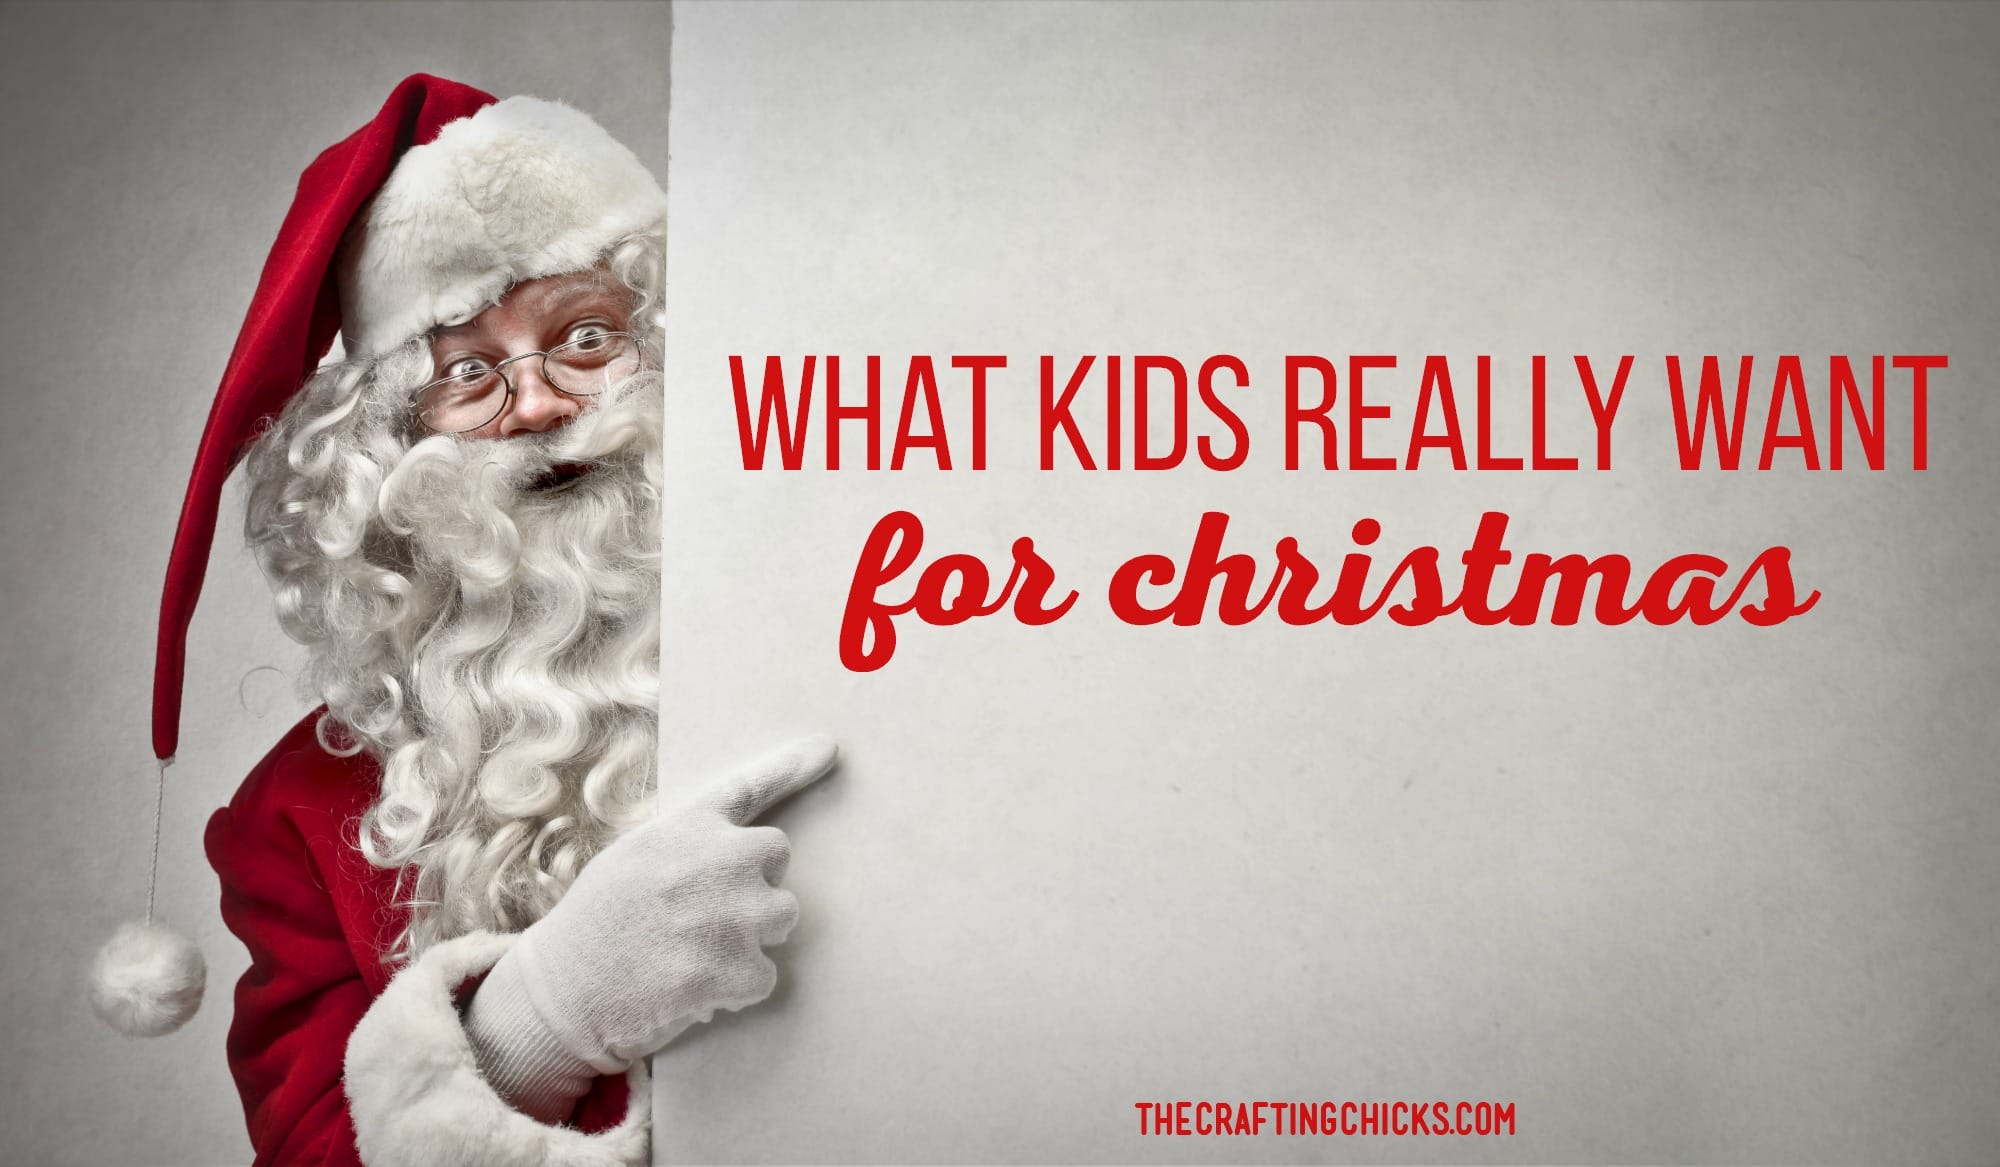 Do you want to know what kids really want to see under the Christmas tree this year? I have the answers for you in this fun gift guide. #kidsgiftguide #giftguideforkids